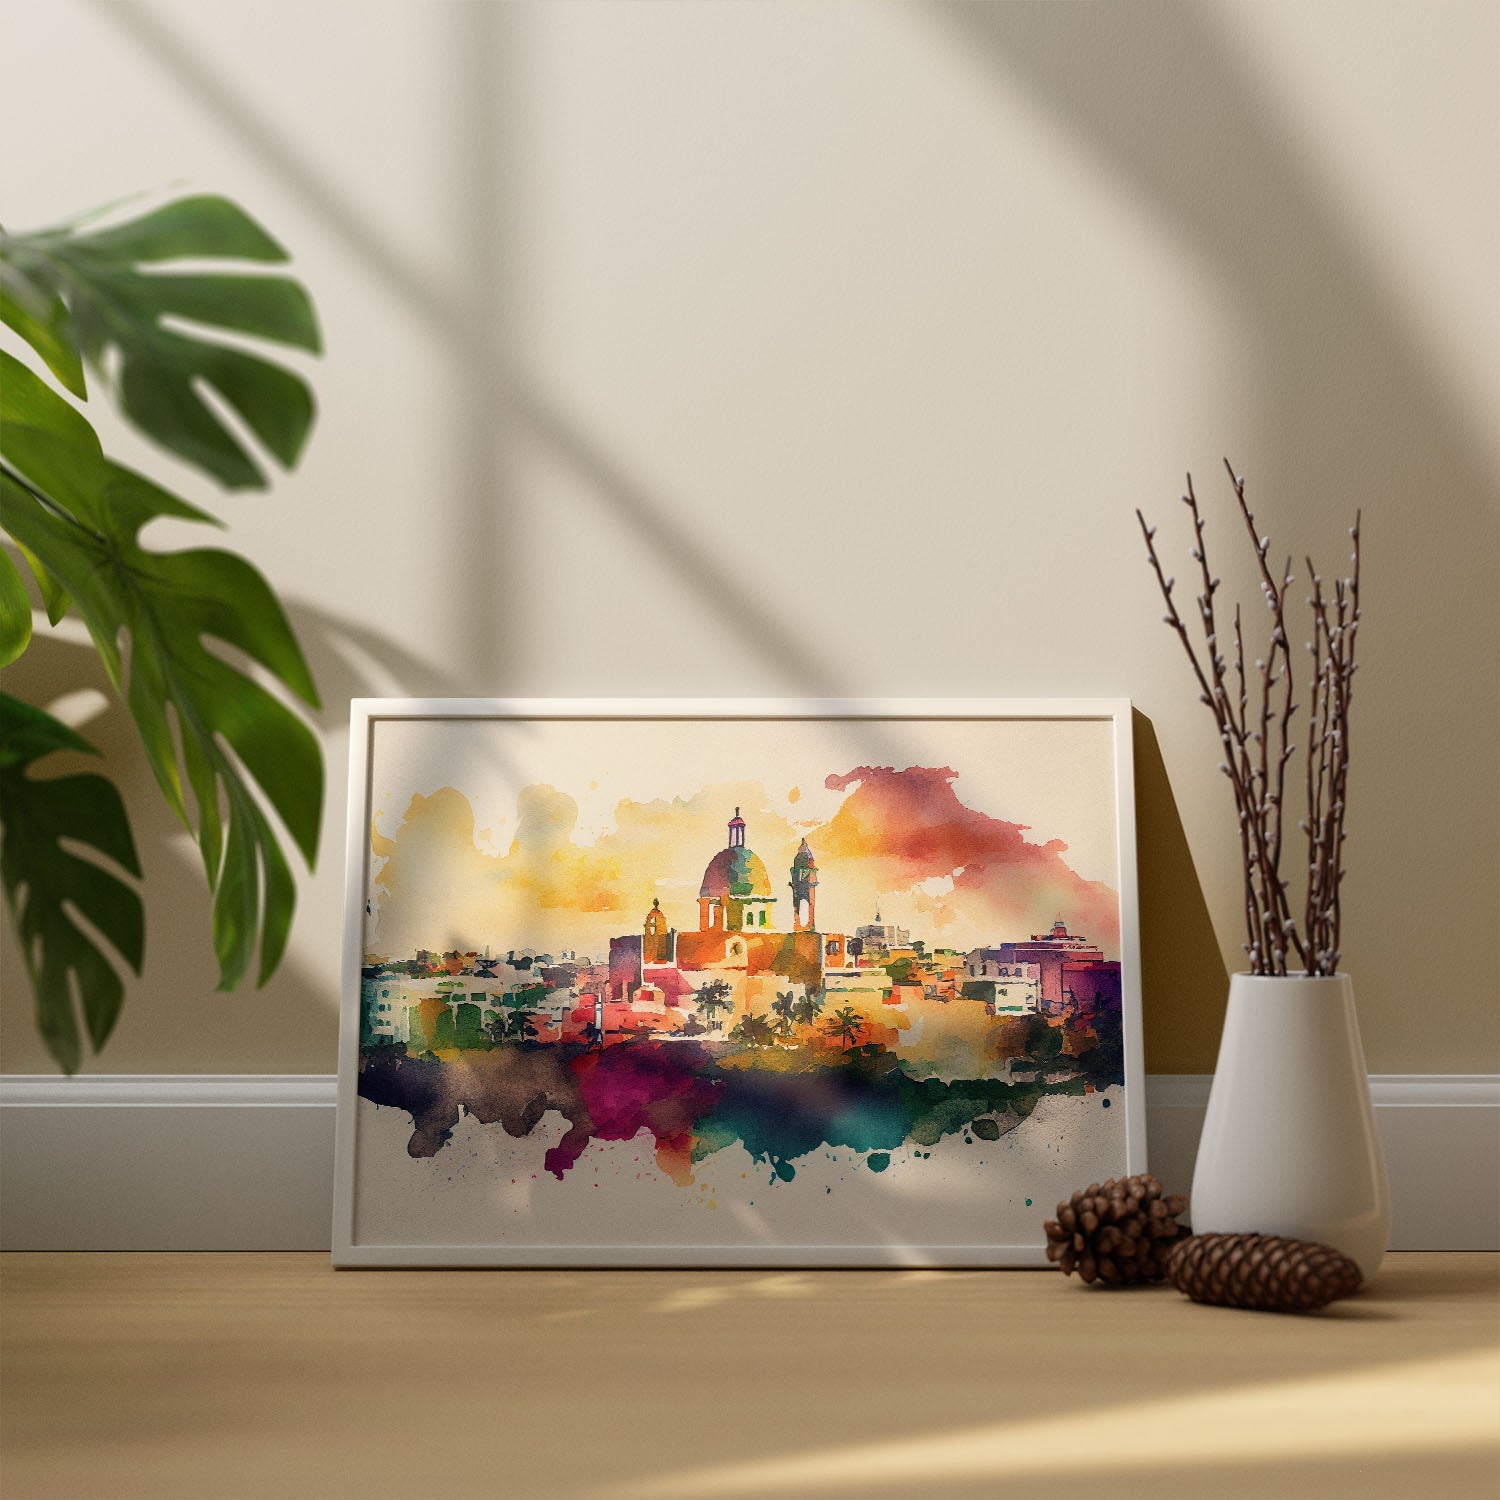 Nacnic watercolor of a skyline of the city of San Juan. Aesthetic Wall Art Prints for Bedroom or Living Room Design.-Artwork-Nacnic-A4-Sin Marco-Nacnic Estudio SL